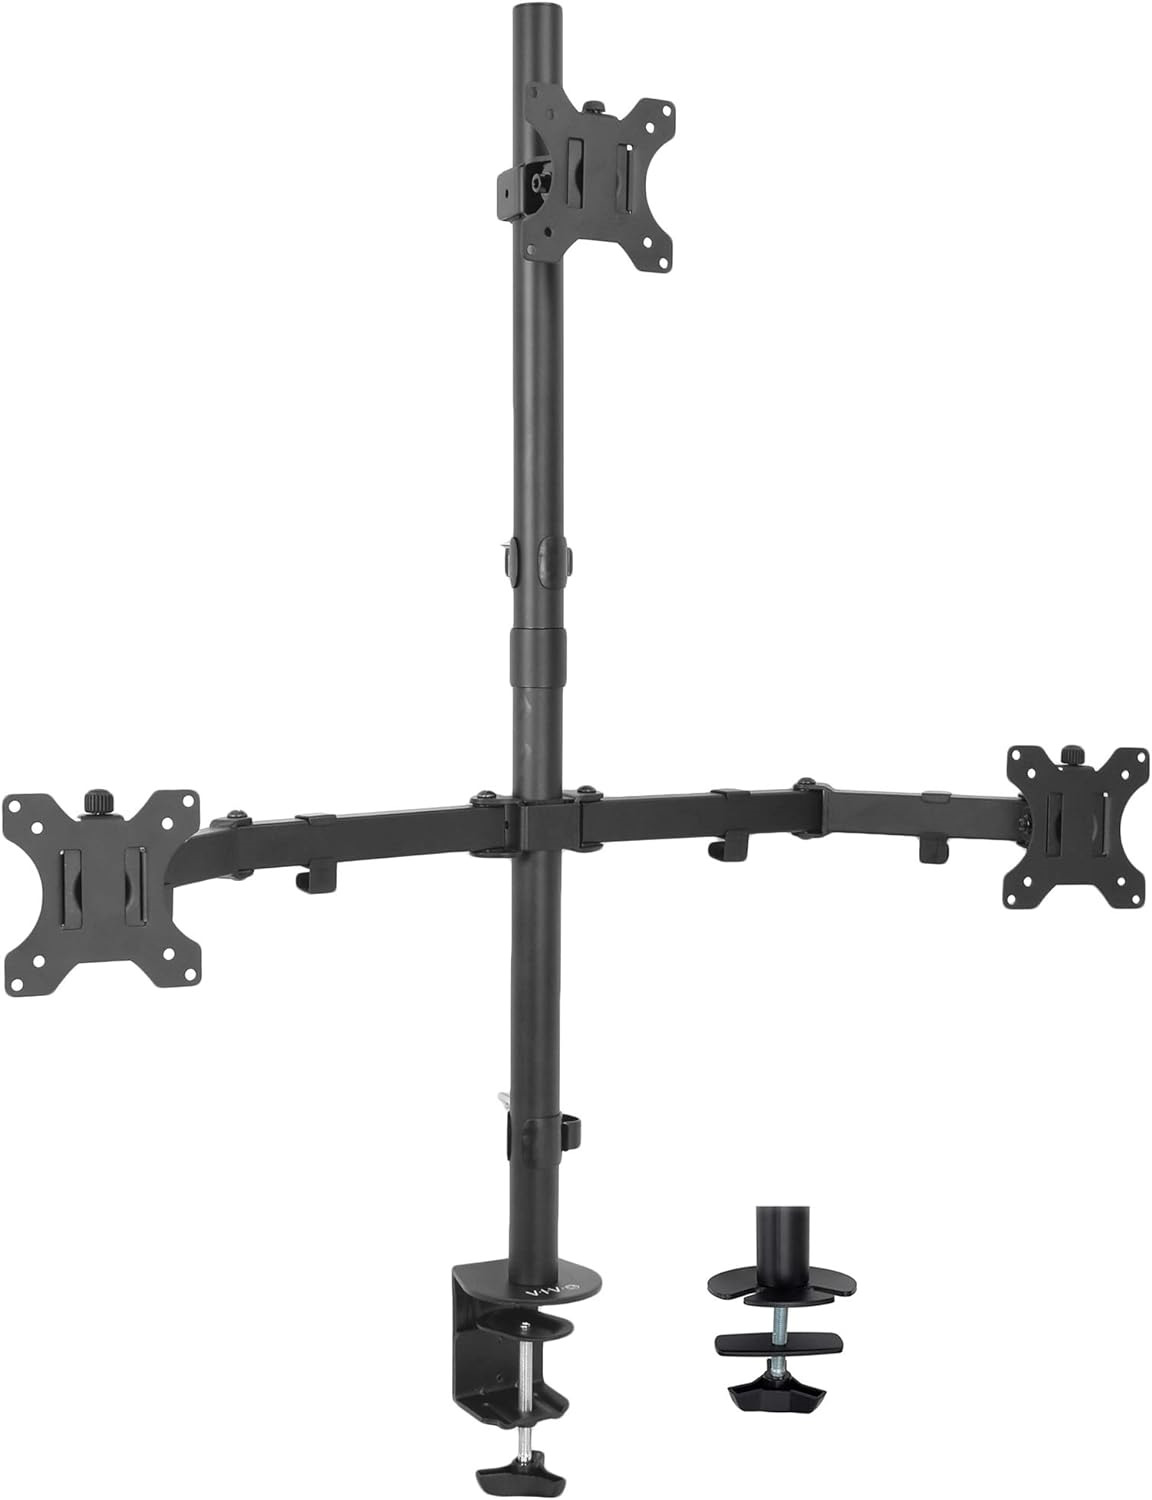 VIVO Quad LCD Monitor Desk Mount Stand HeavyDuty Fully Adjustable fits 3 screens